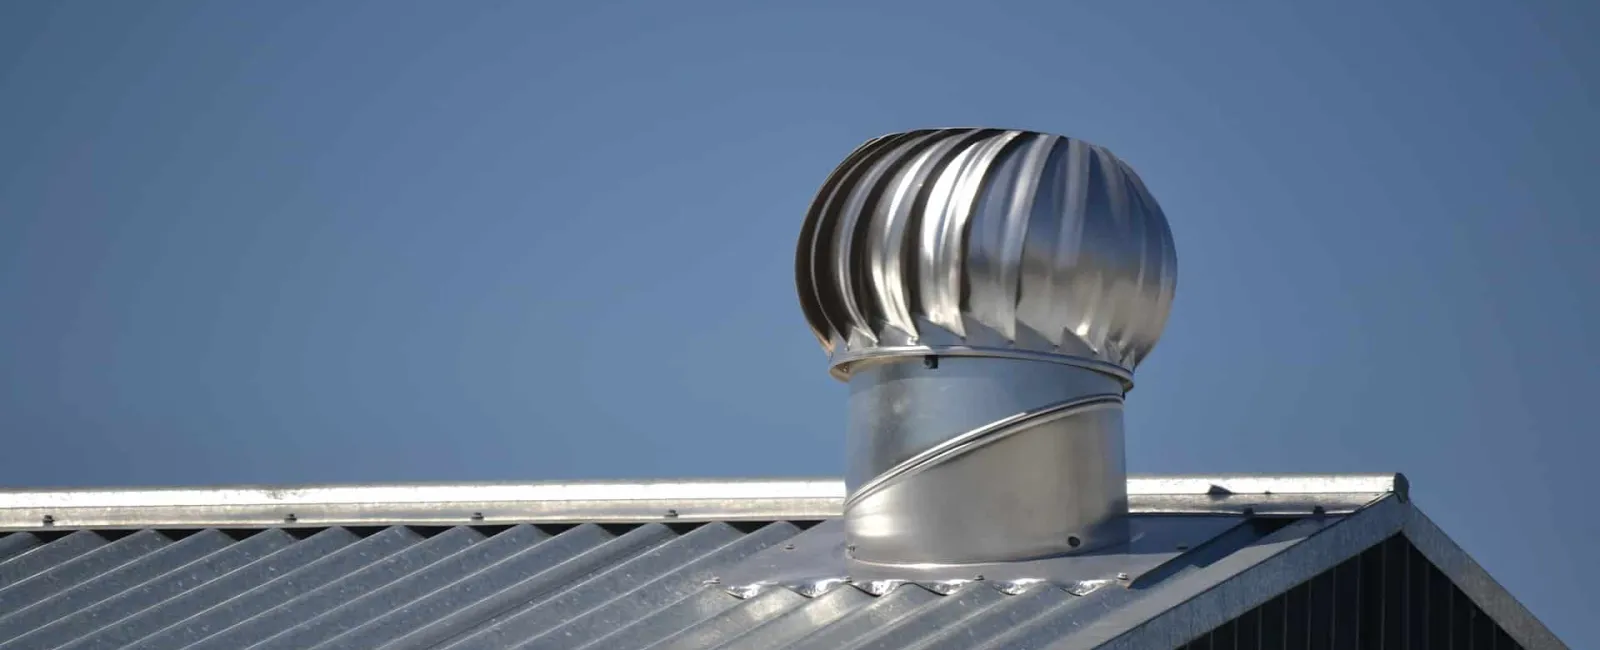 Metal Roof Replacement: A List of Red Flags You Need to Know